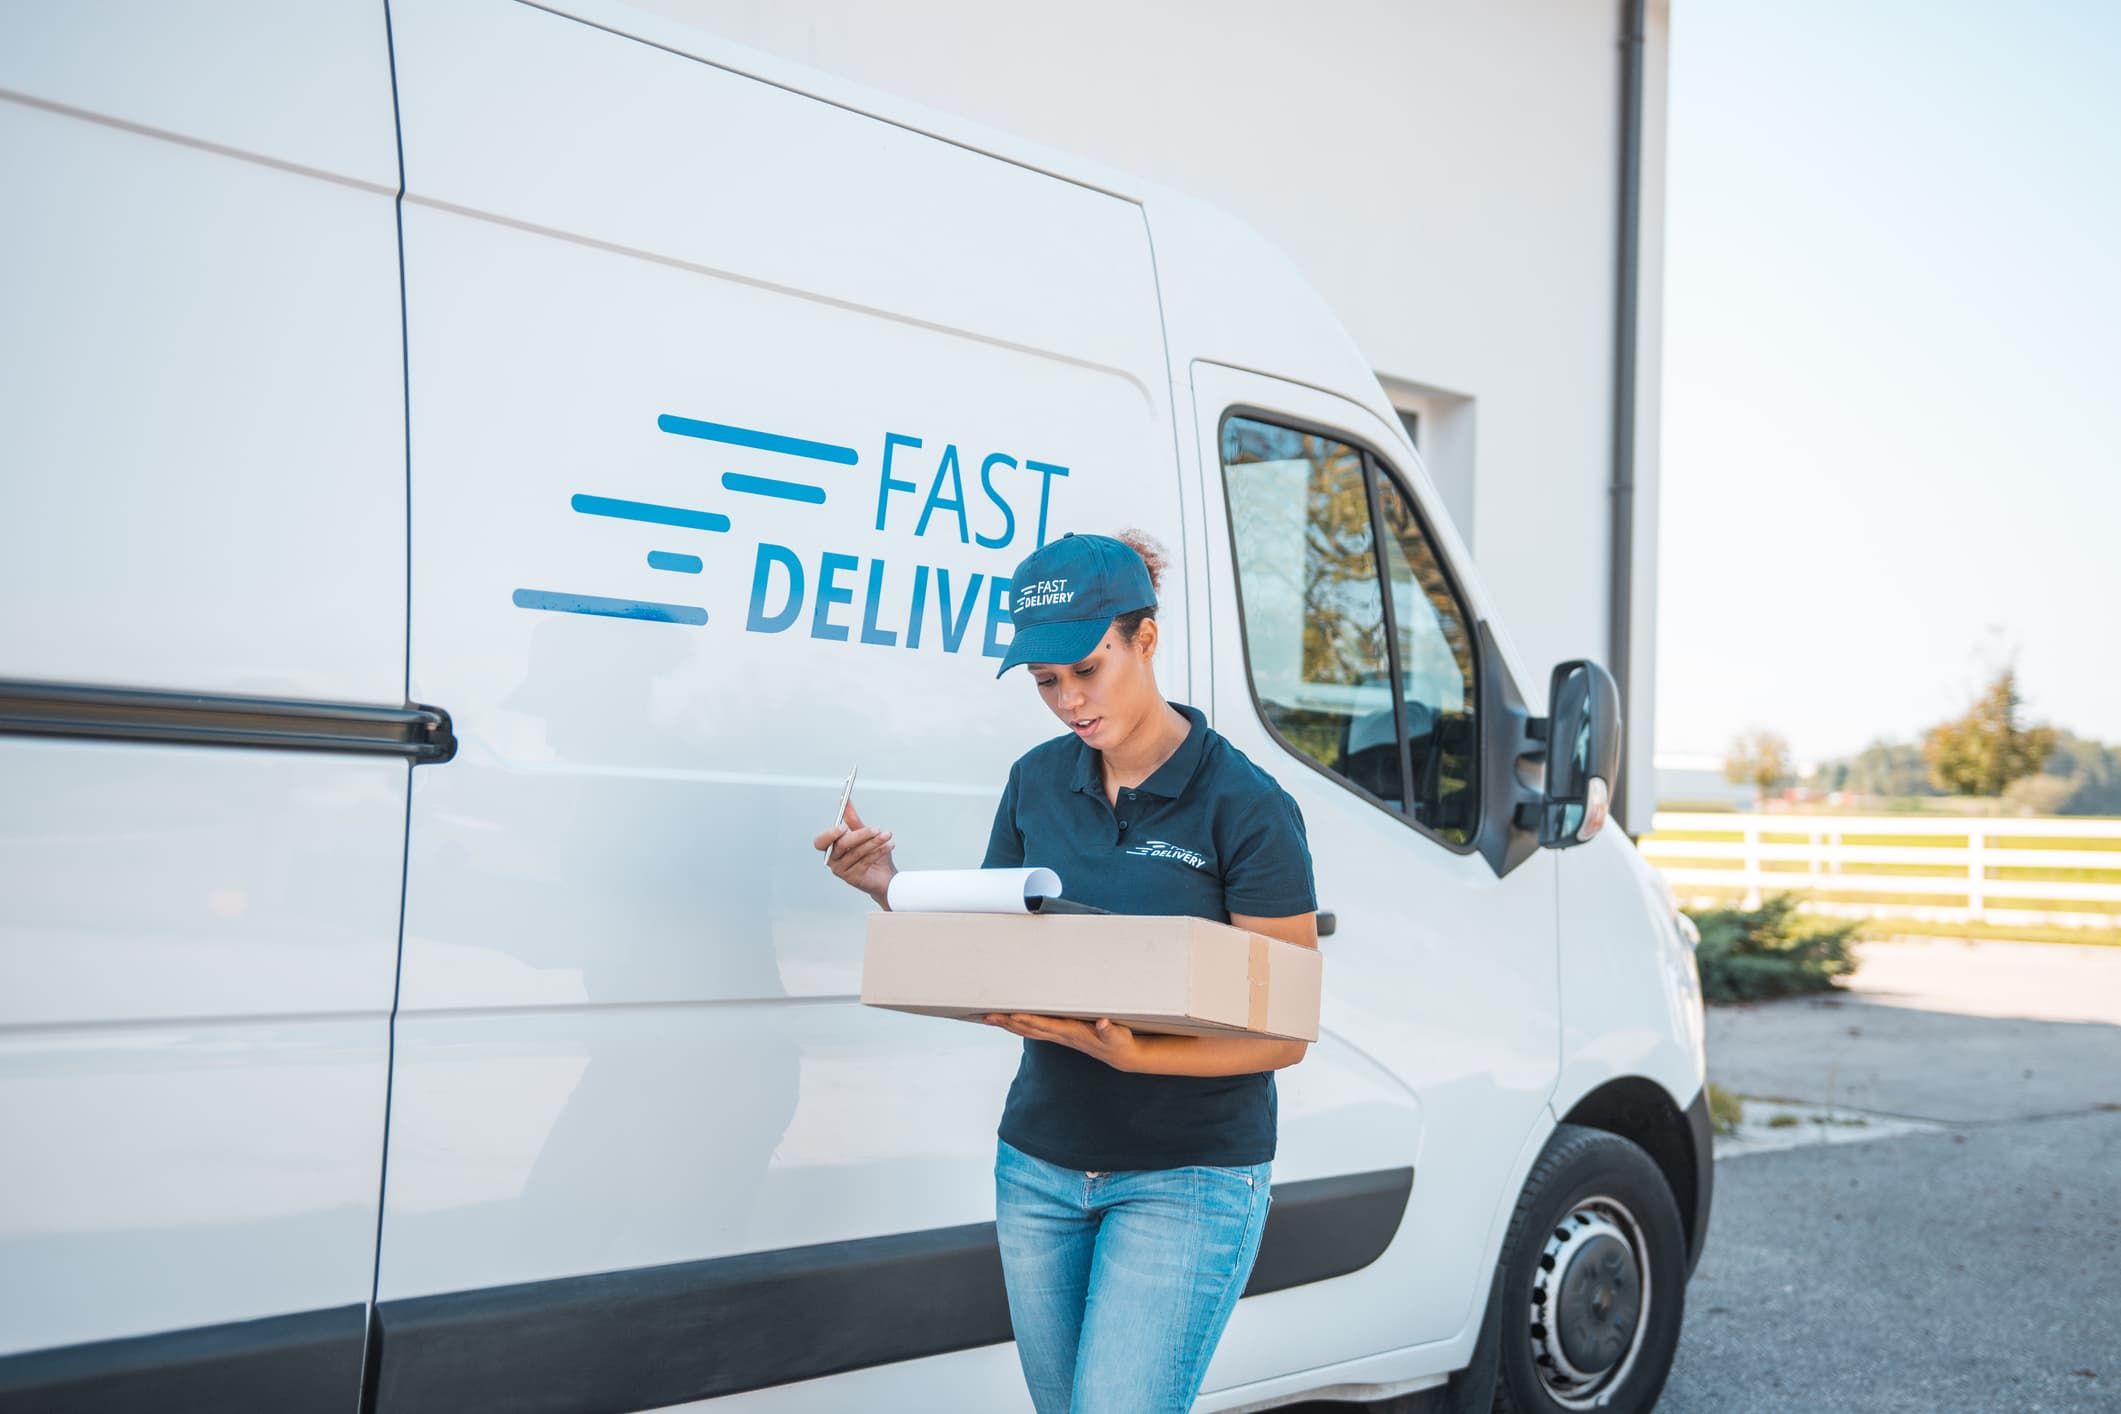 Delivery woman standing next to delivery van